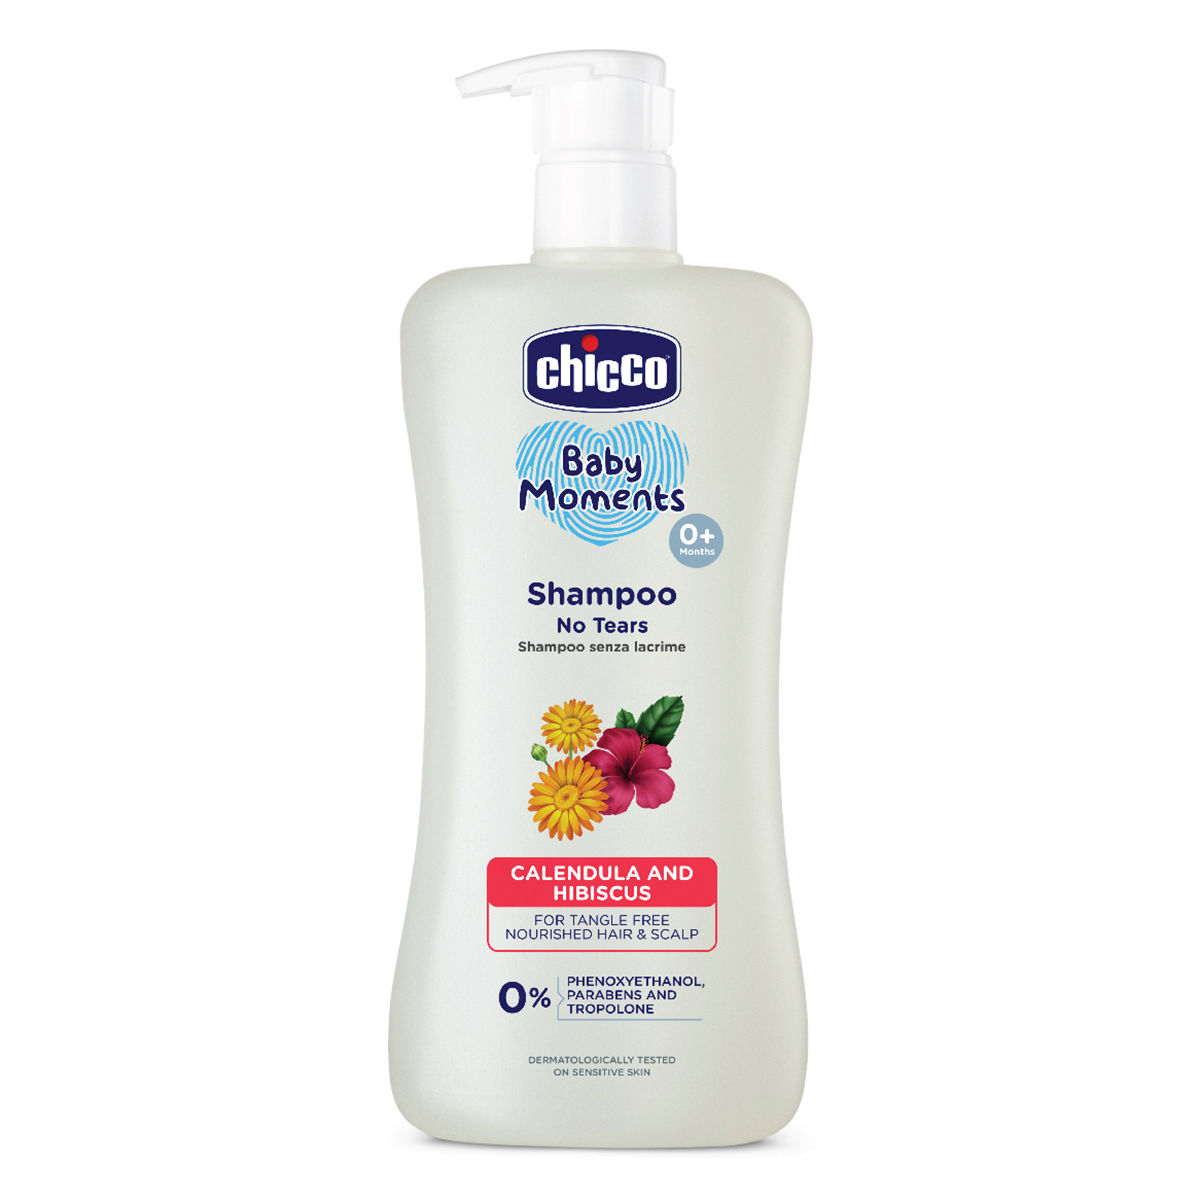 Chicco Baby Moments No Tears Shampoo, 500 ml, Pack of 1 